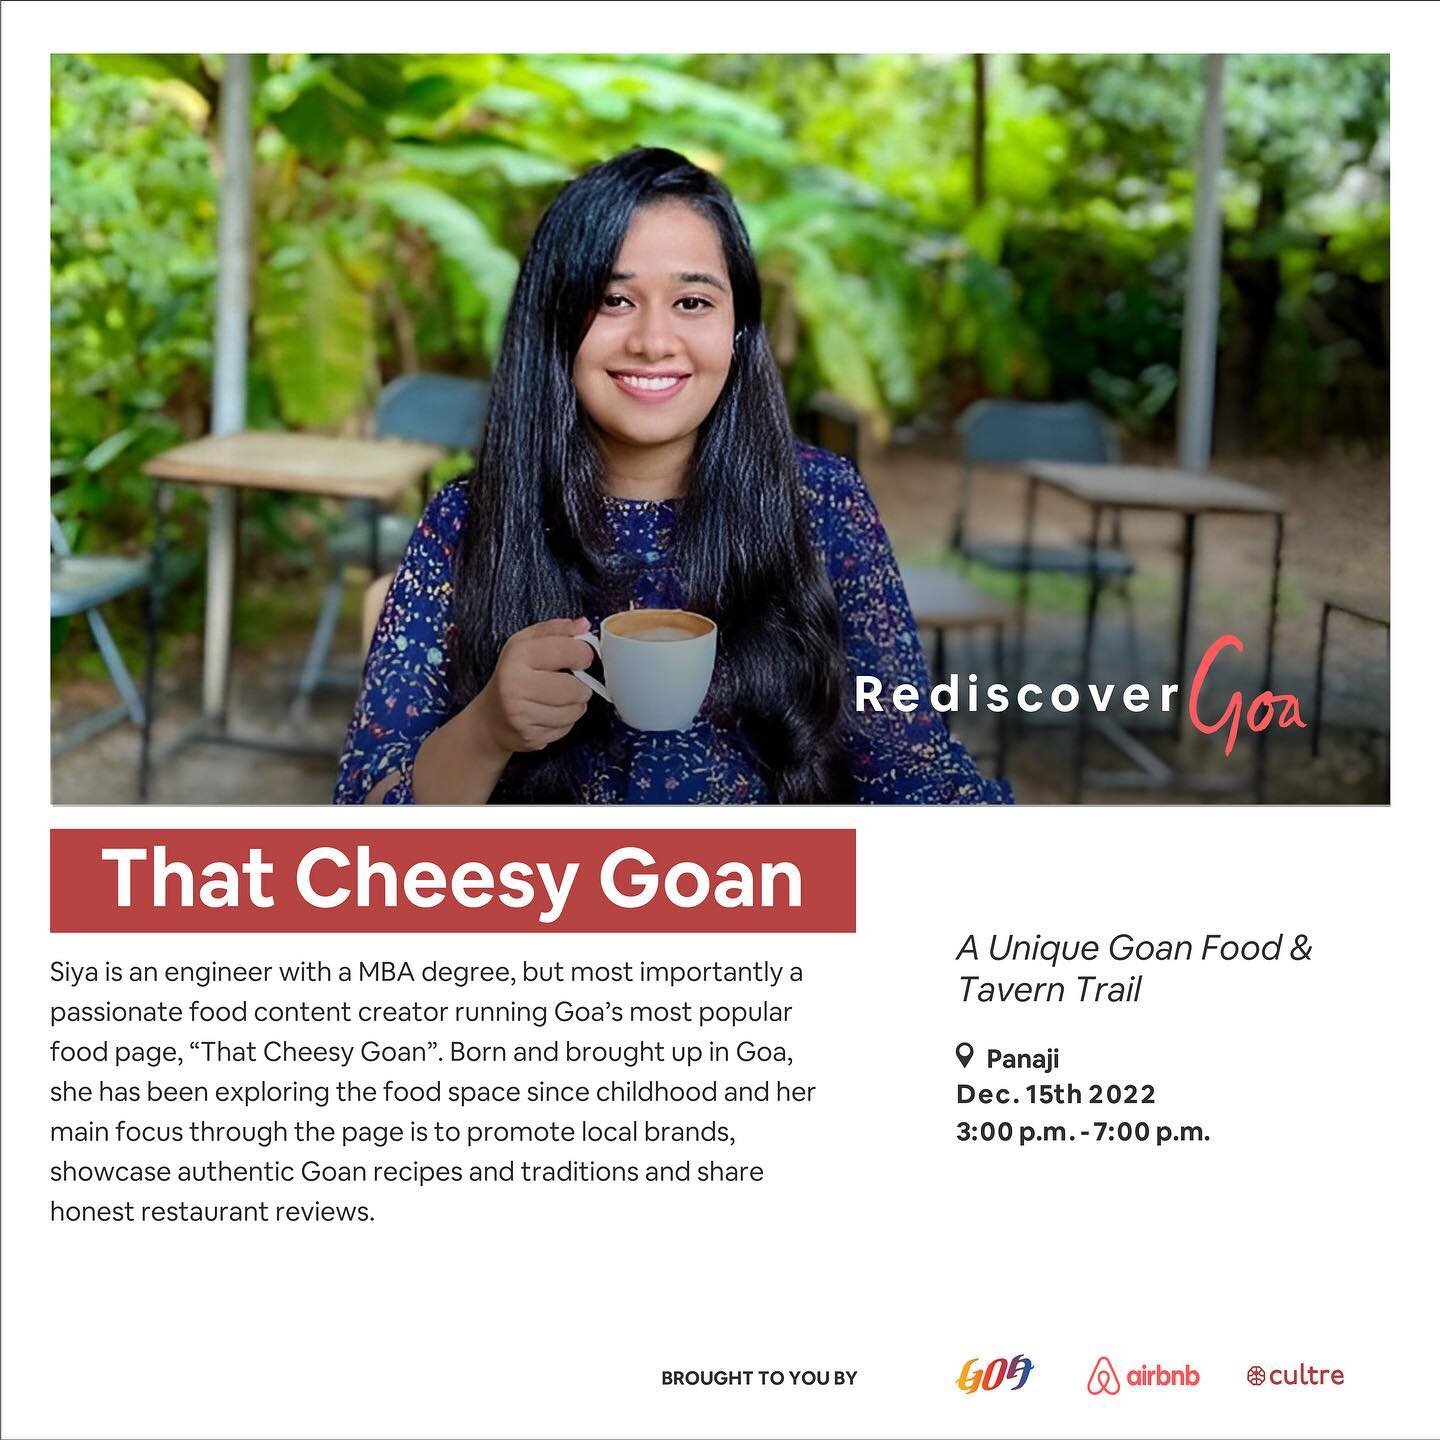 #MeetYourHost Siya, an engineer with a MBA degree, is the person behind Goa&rsquo;s most popular food page -  That Cheesy Goan. Born and brought up in Goa, she is a food content creator who focuses on promoting local Goan brands and popularising auth